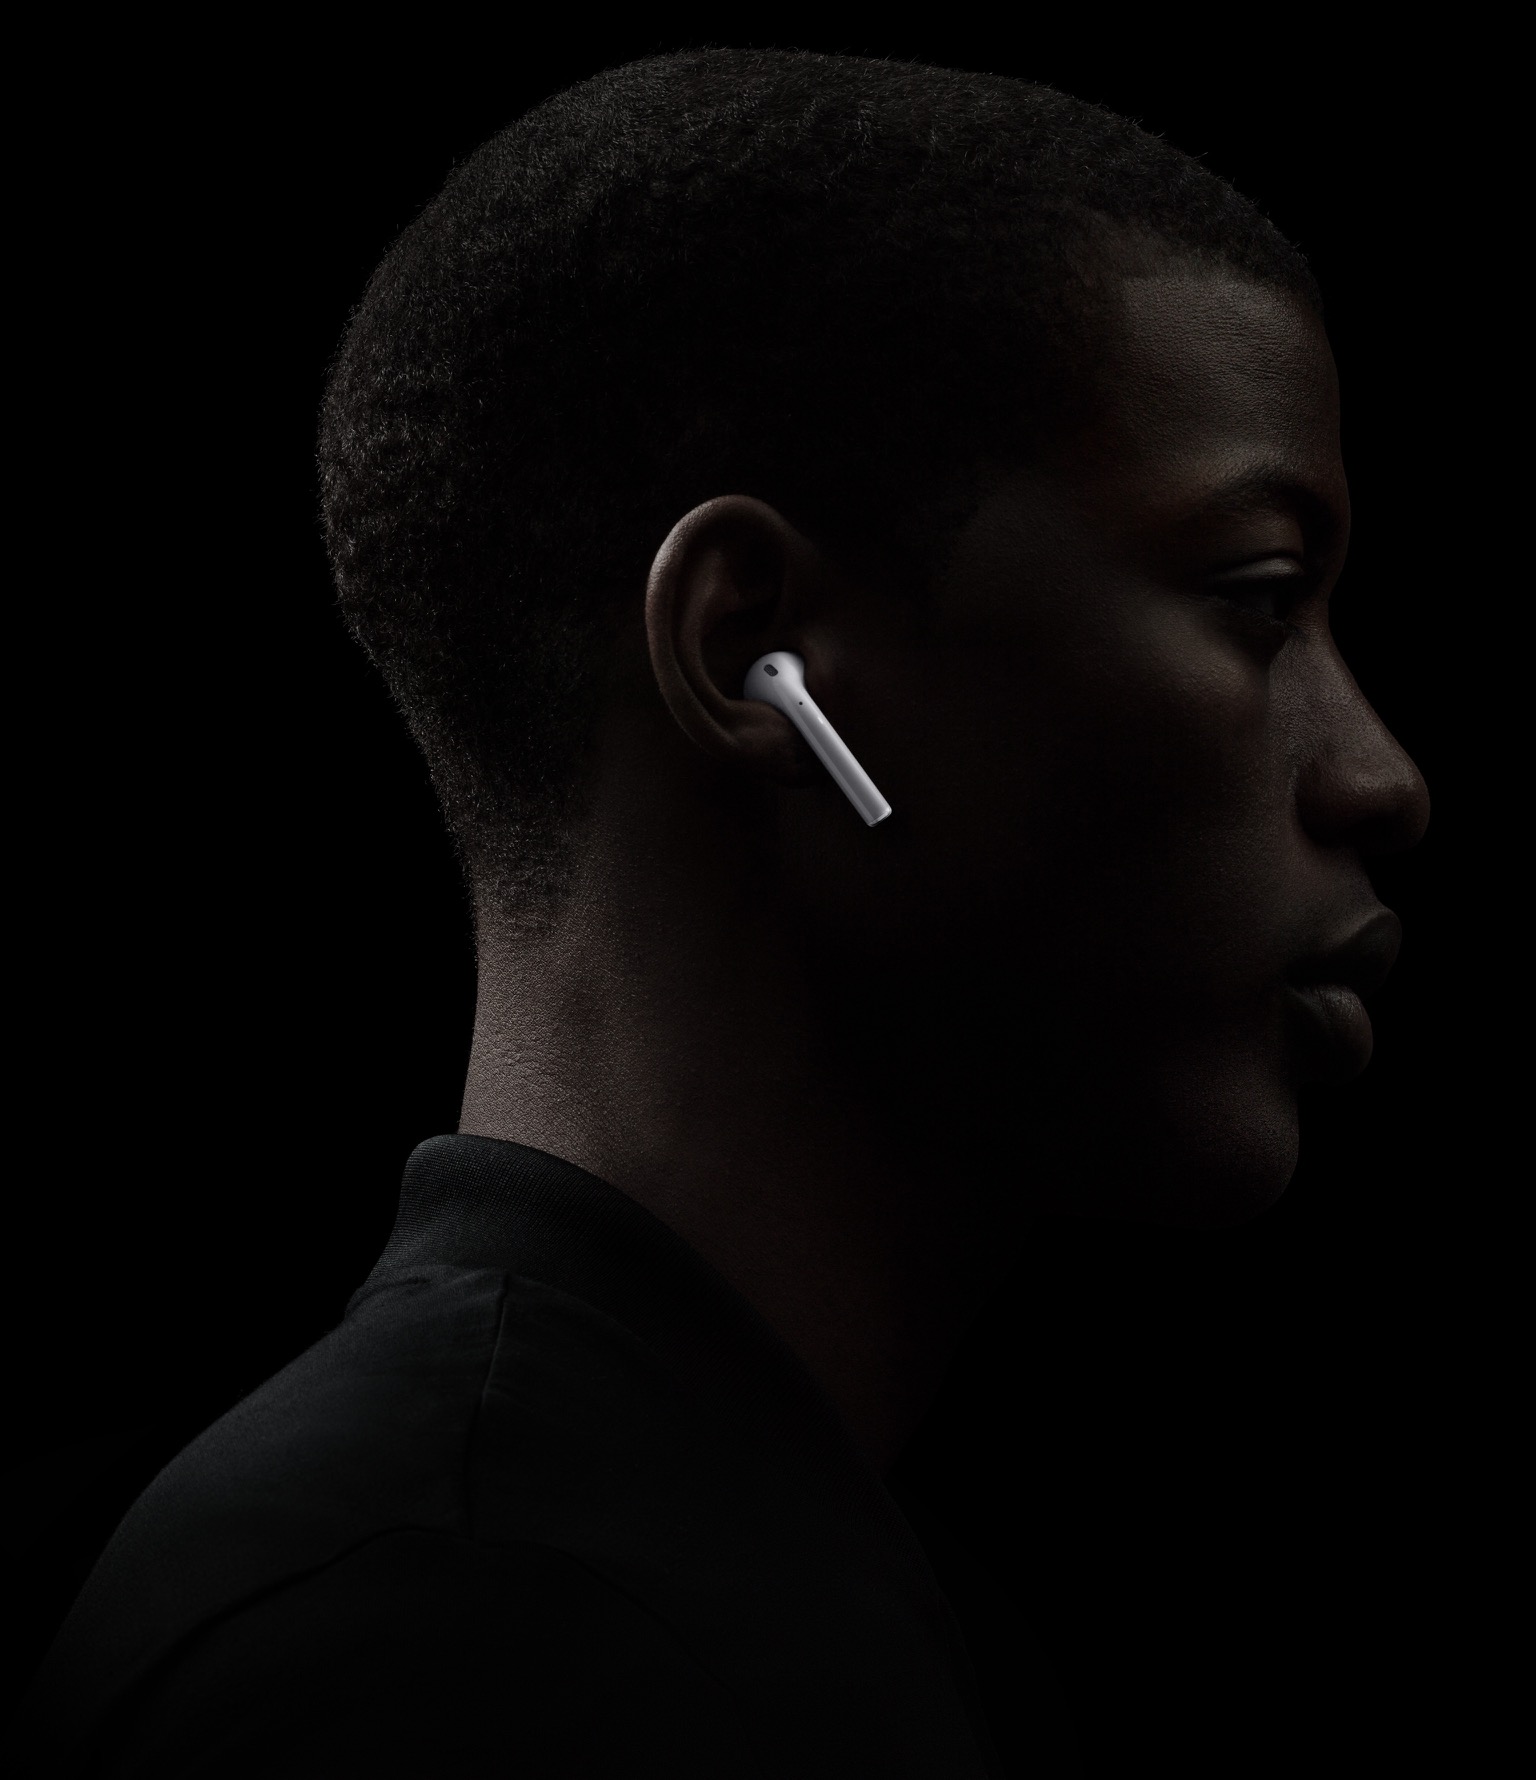 Launch of AirPods (new wireless headphones from Apple) may stay for 2017; or not